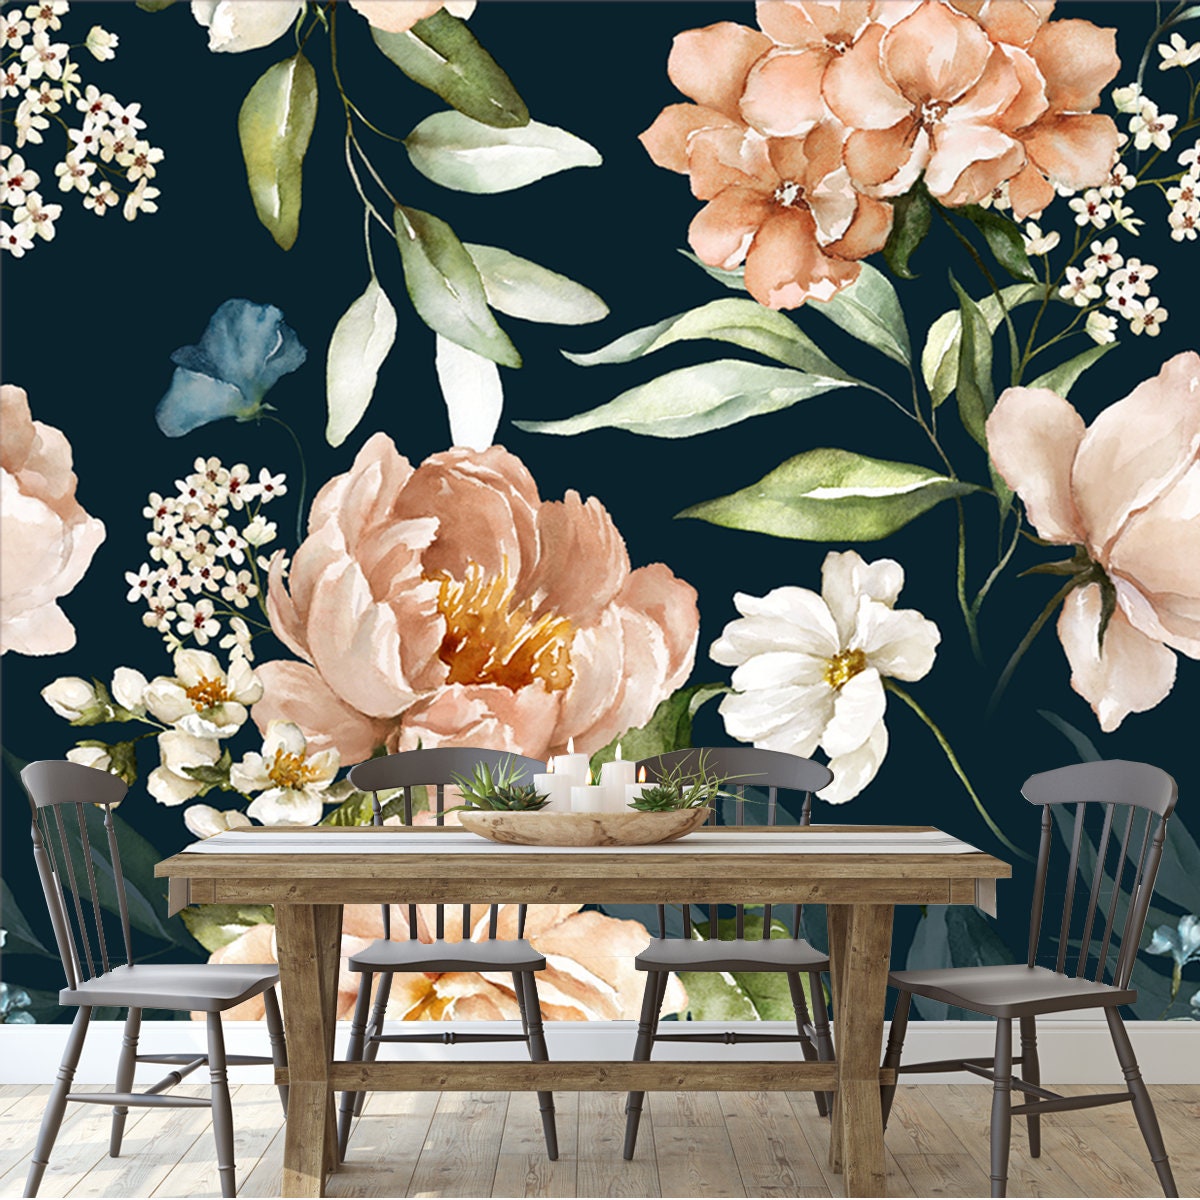 Seamless Watercolor Floral Pattern - Pink Blush Flowers Elements, Green Leaves Branches on Dark Black Background Wallpaper Dining Room Mural